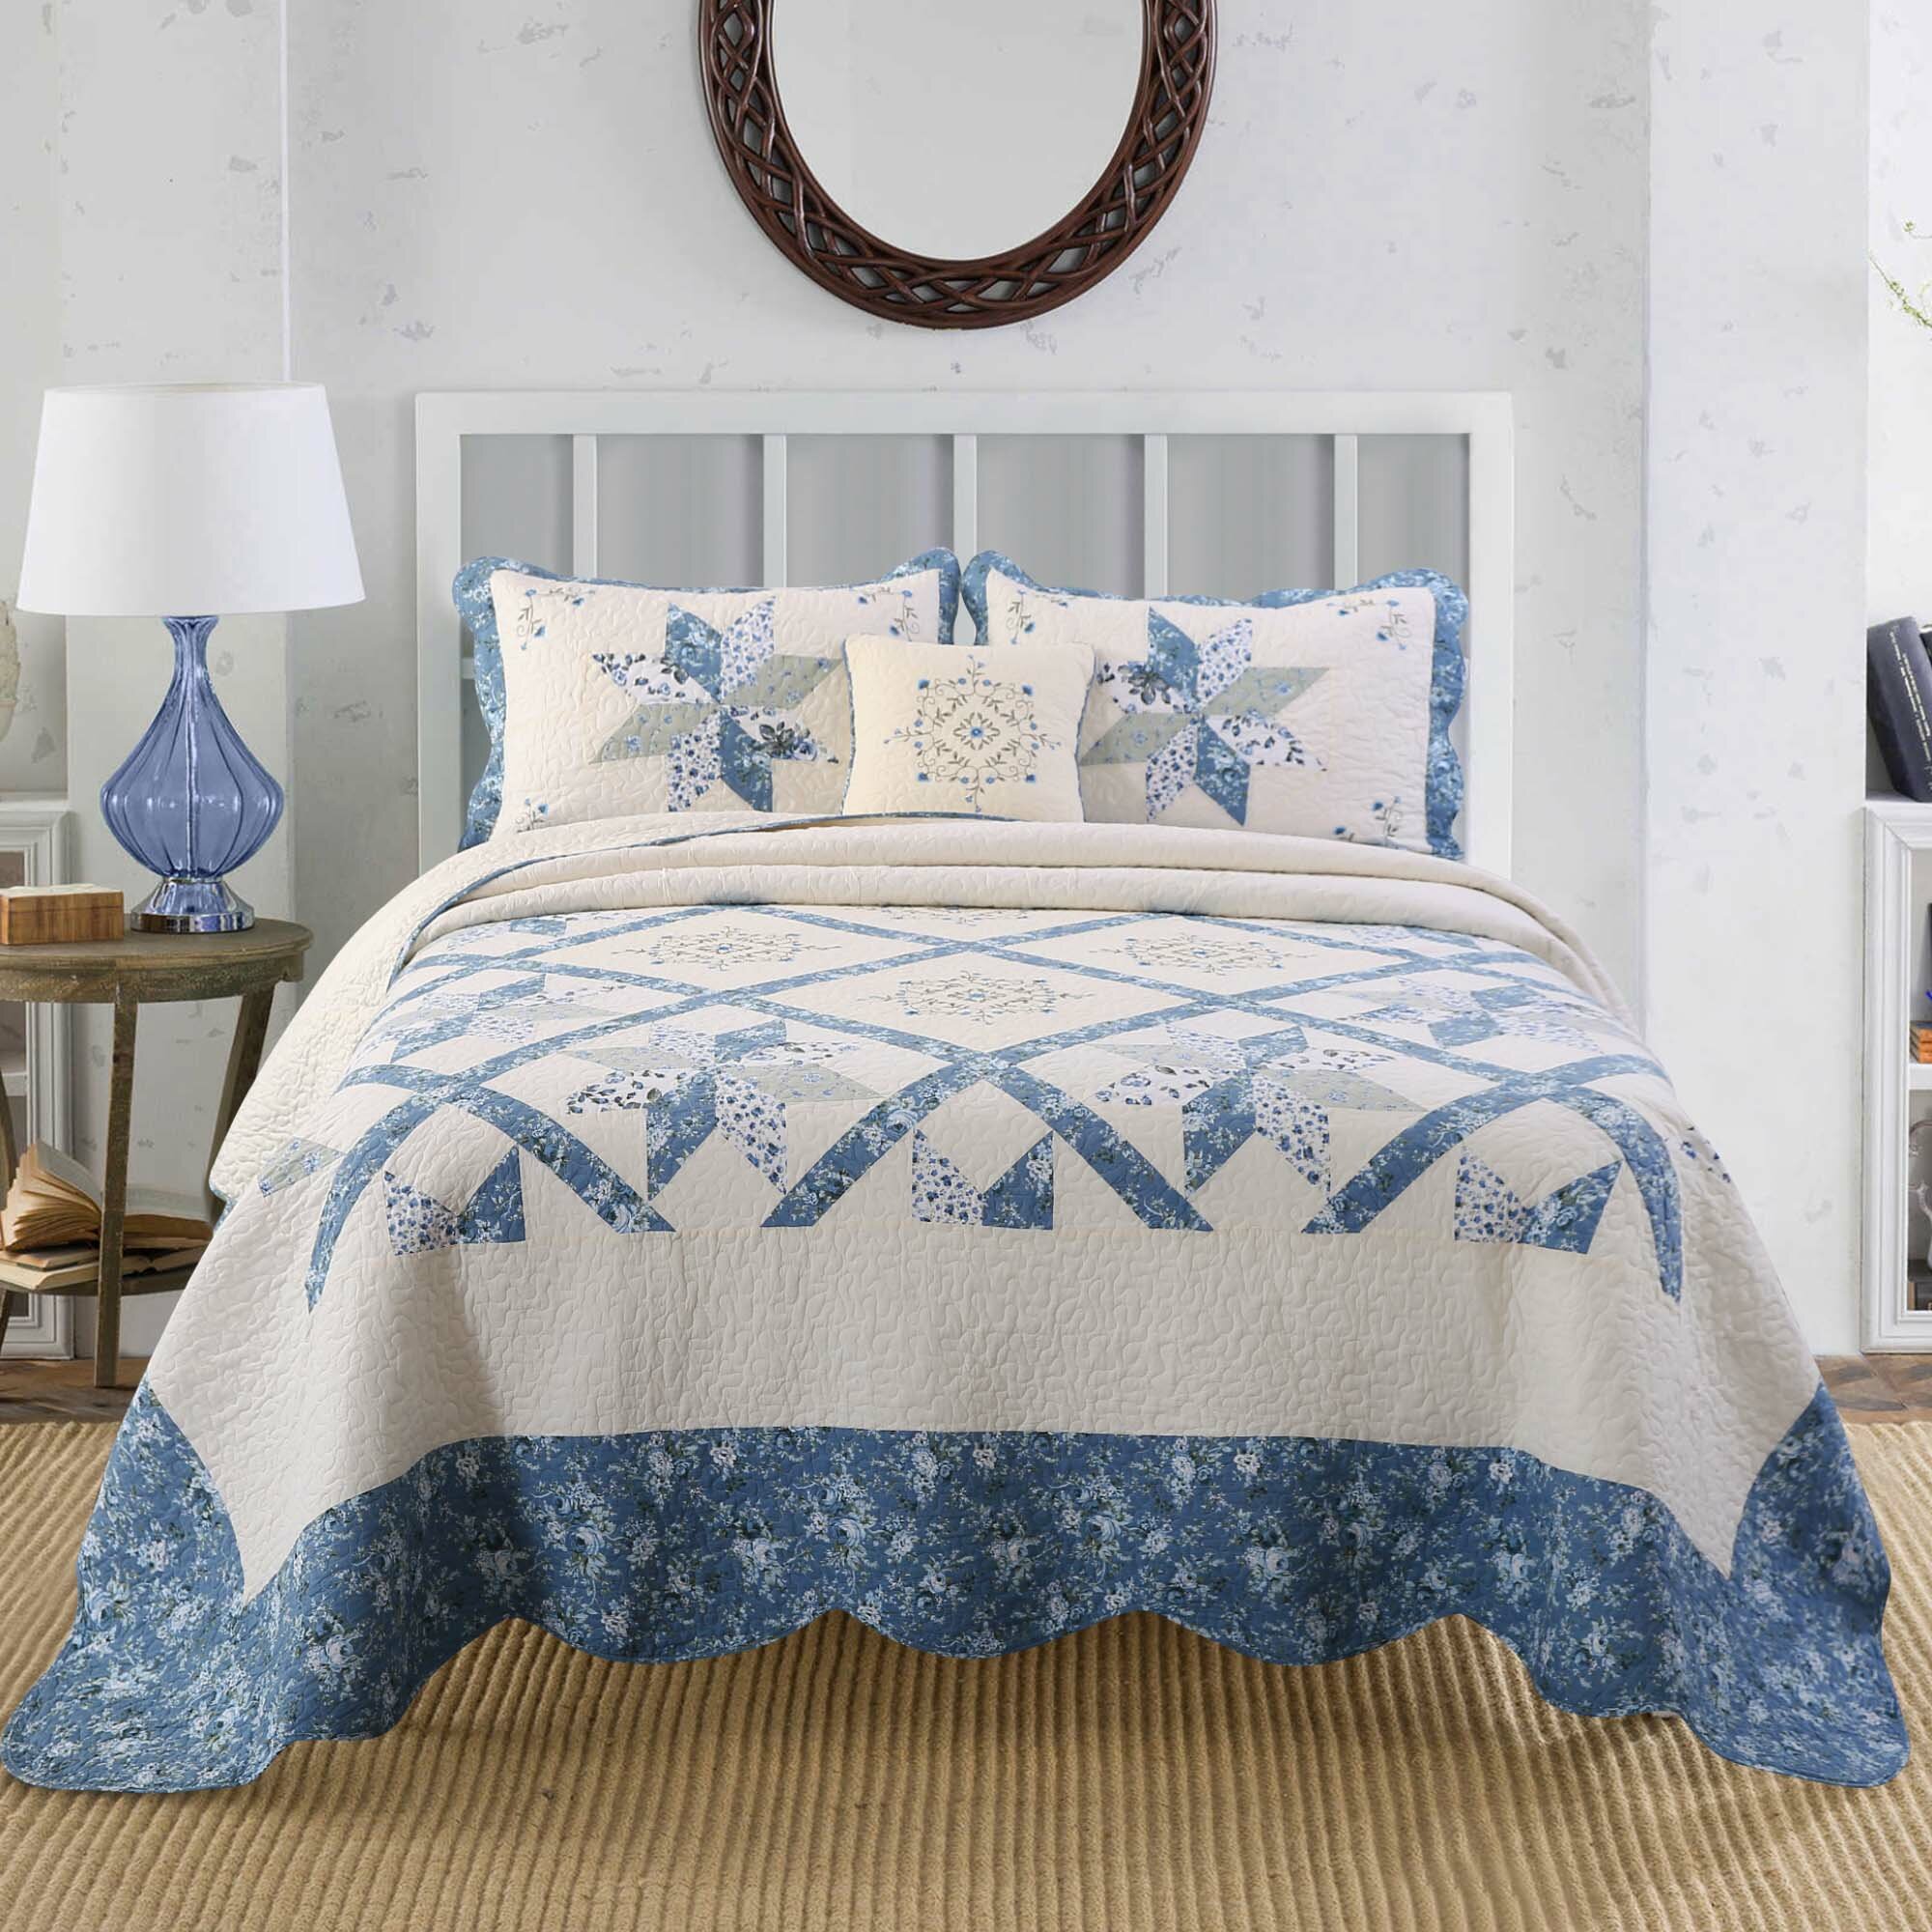 30 Drop Dust Ruffle Quilted Bed Spread with Pillow sham 800 TC